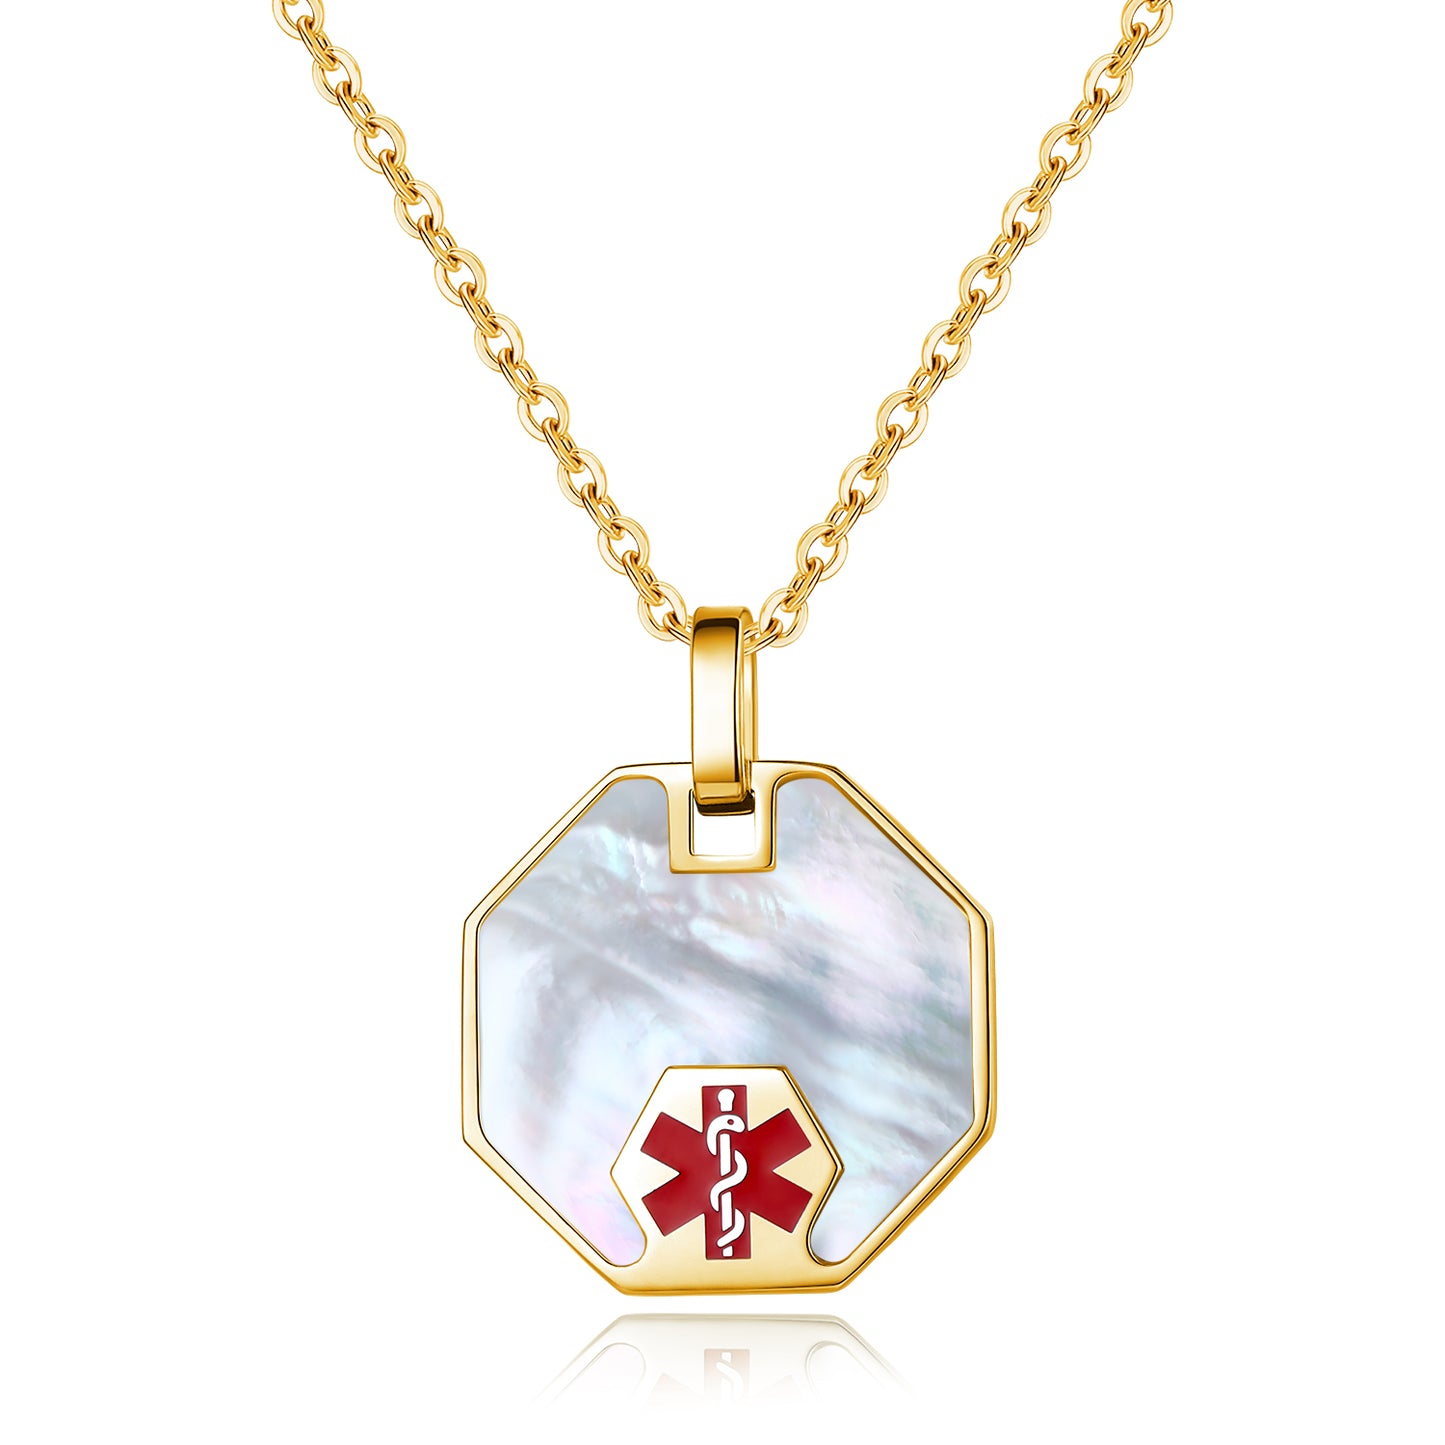 Pearl/Shell Shiny set in Stainless Steel Octagon Medical ID Pendant with 24" chain